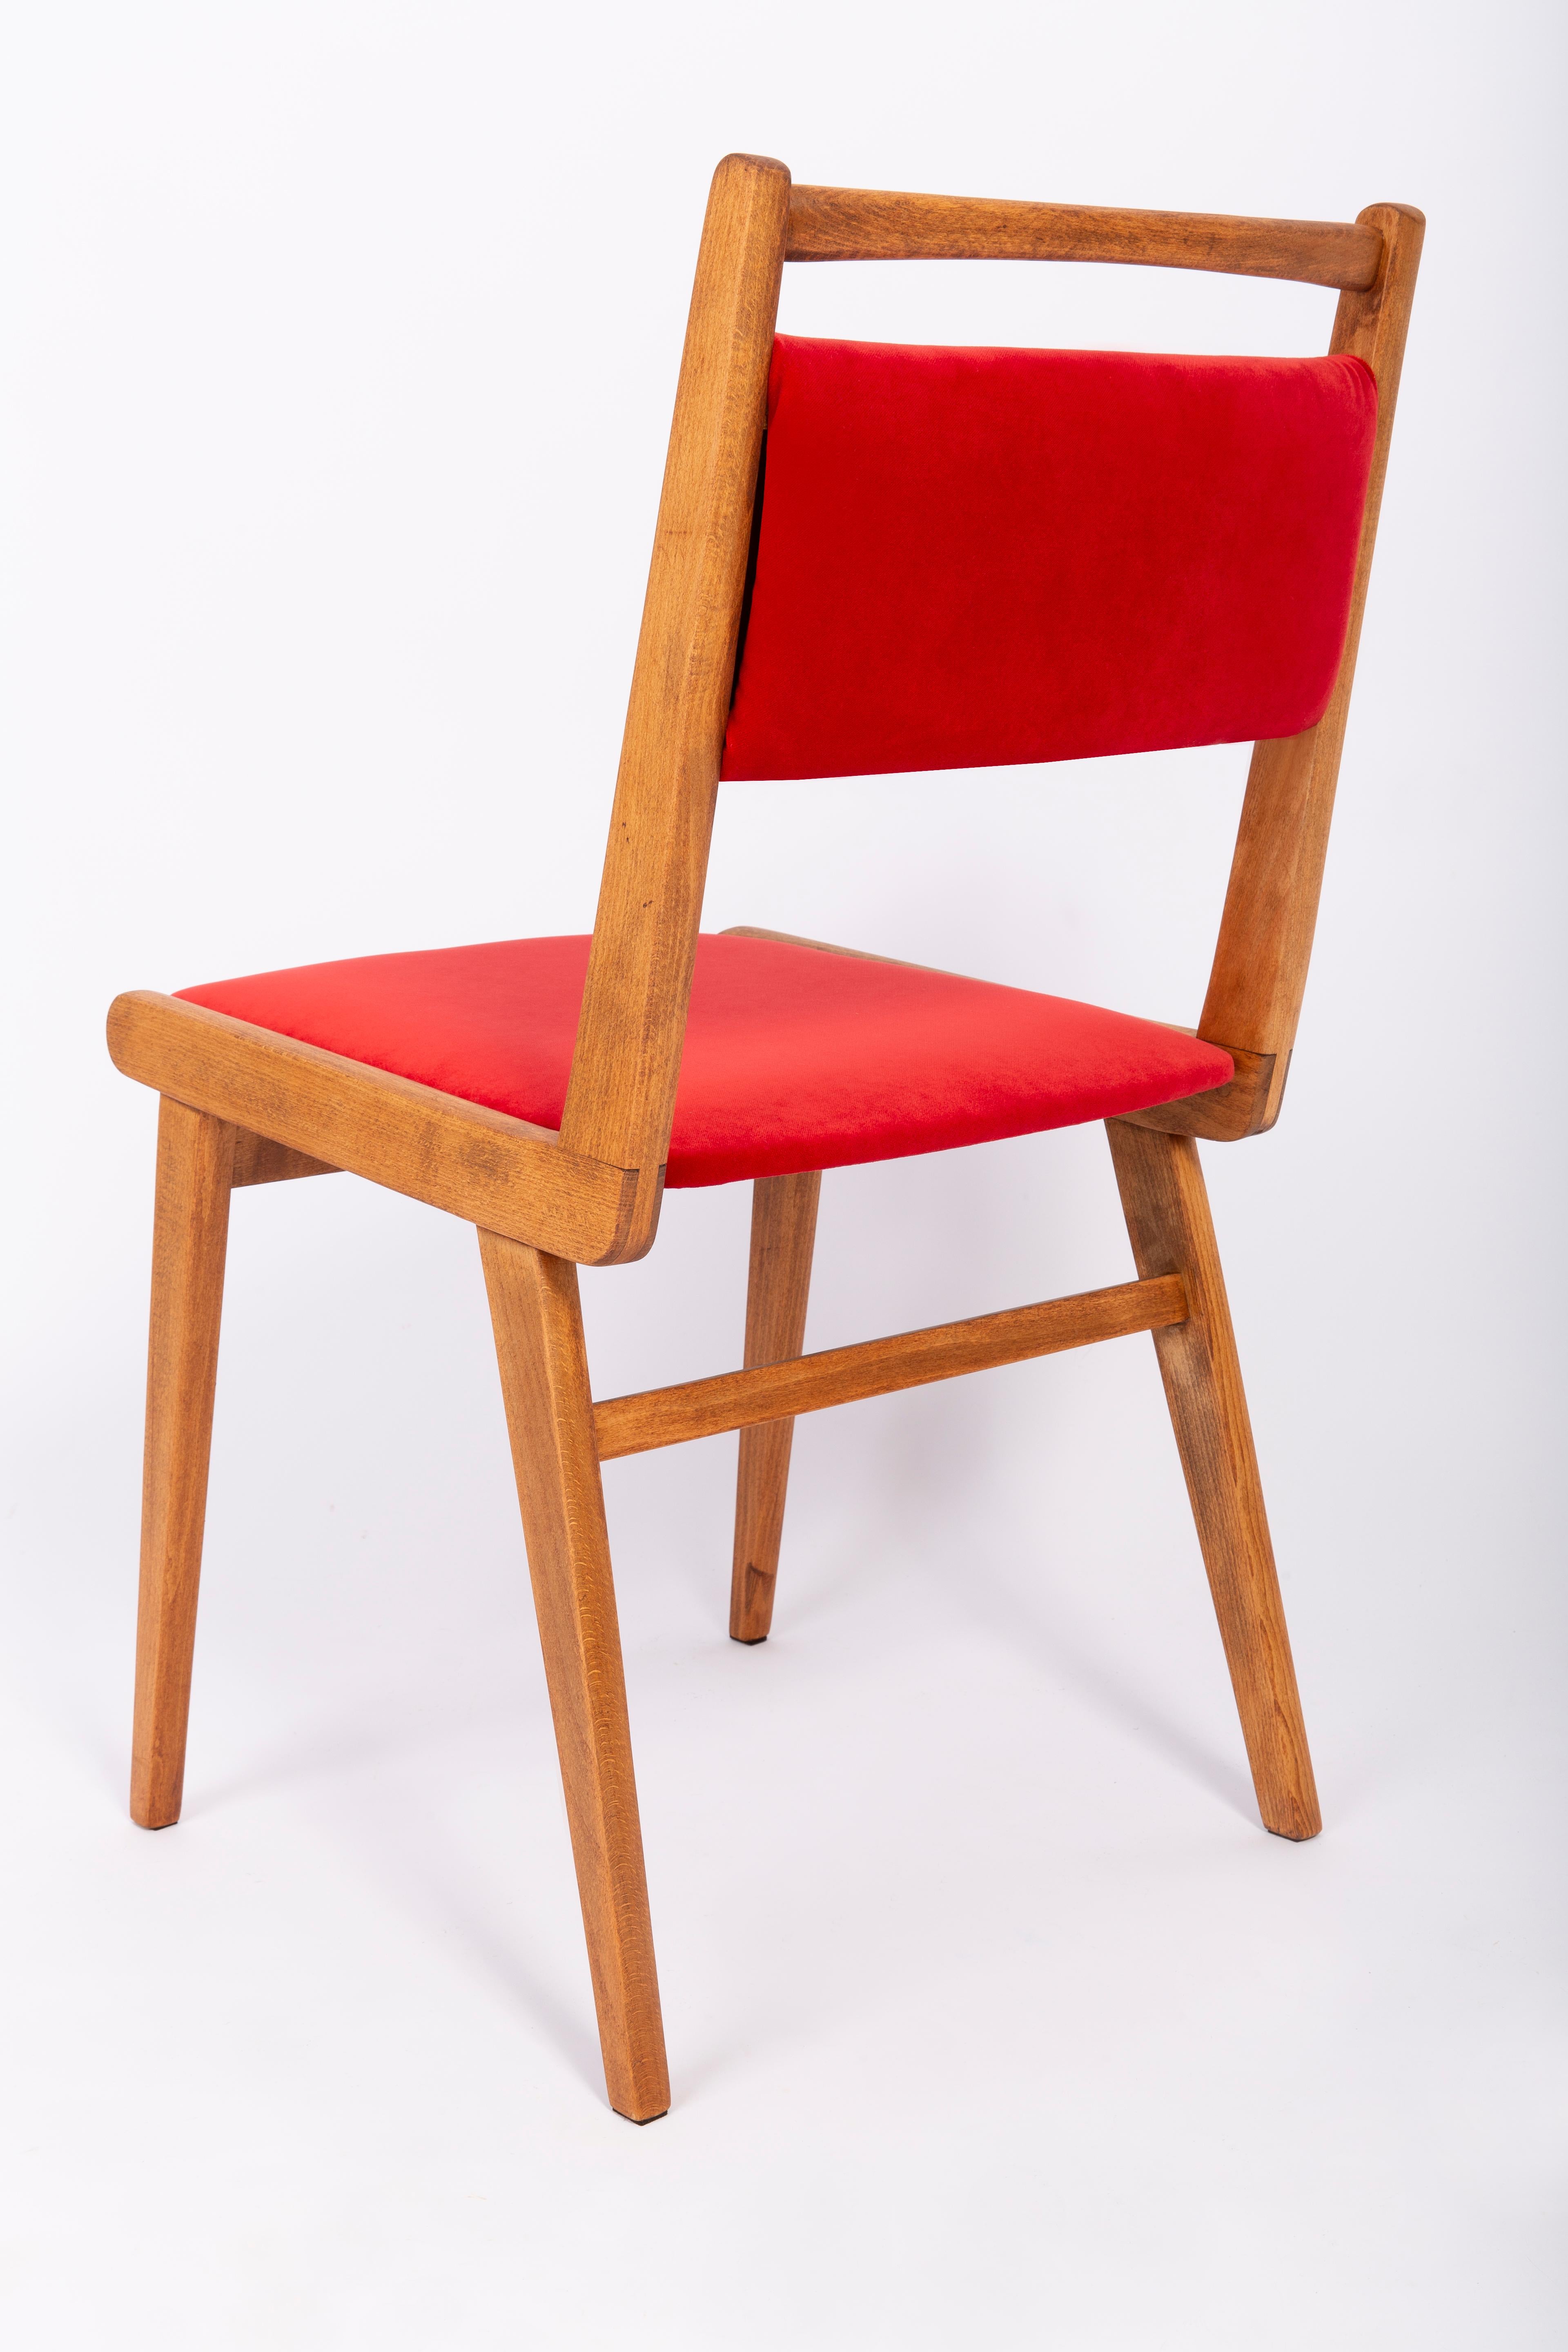 Set of Four 20th Century Red Velvet Chairs, by Rajmund Halas, Poland, 1960s For Sale 3